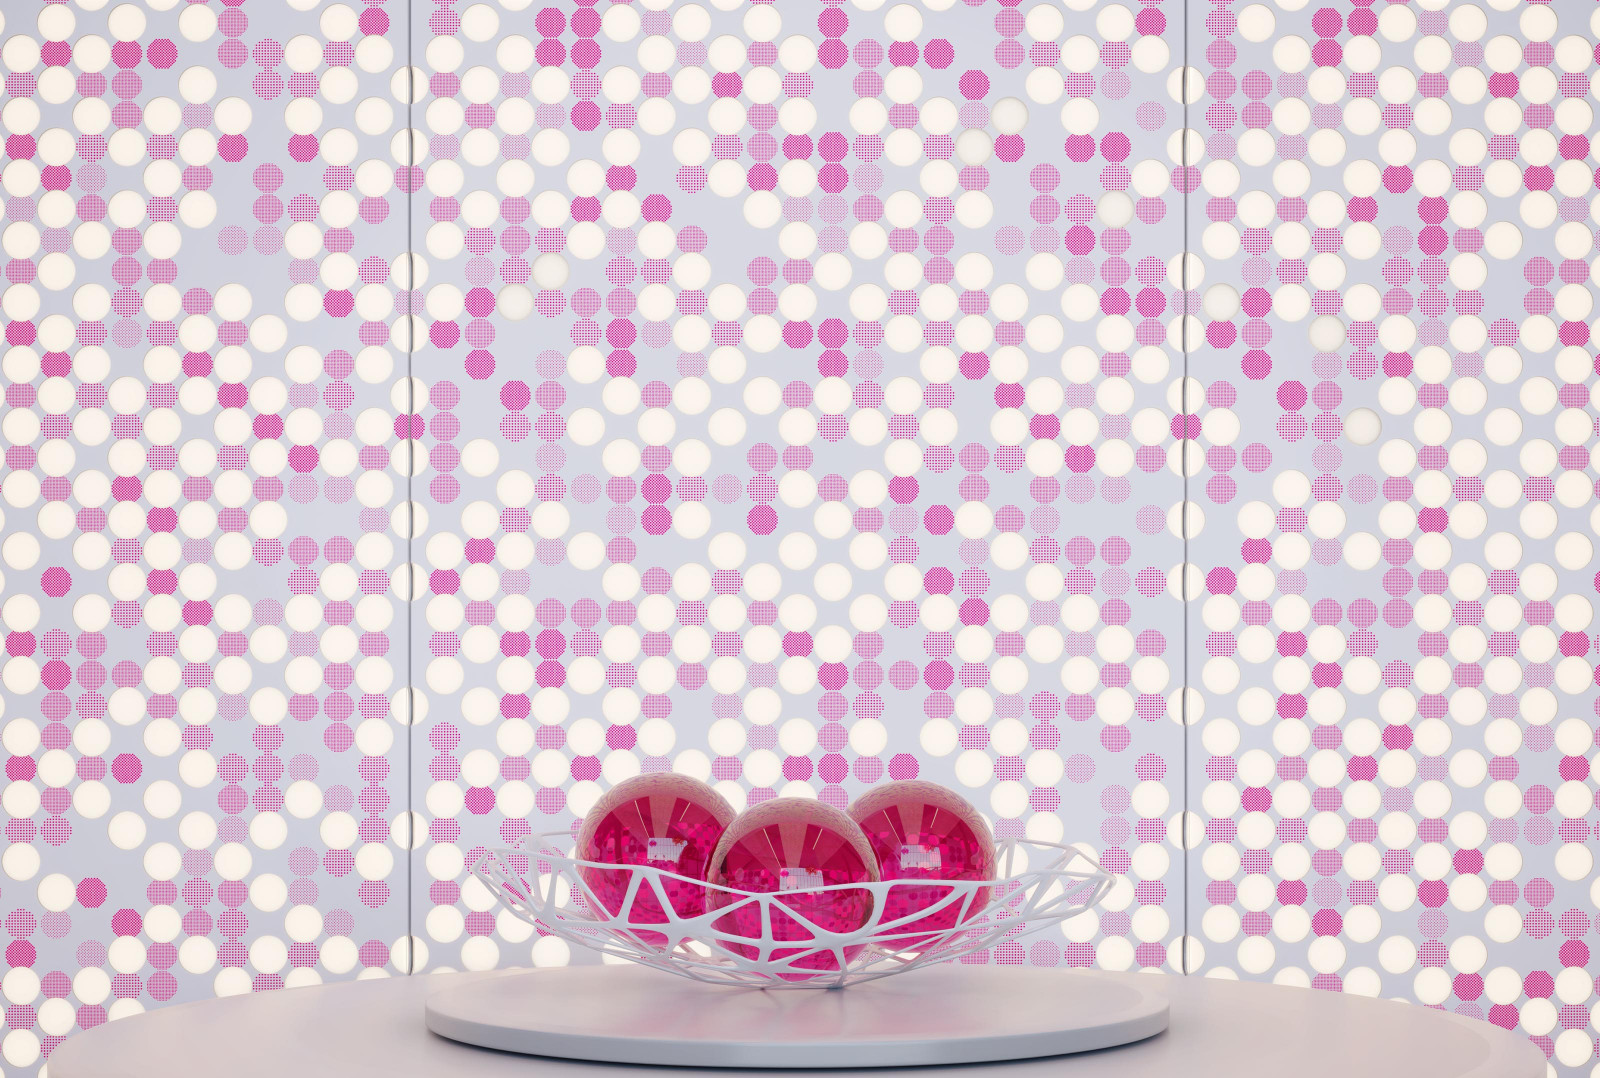 This grey table has a bowl holding three pink balls. The wall behind the table is pink, white and grey VaporHue™ Pop panels with integrated backlighting.